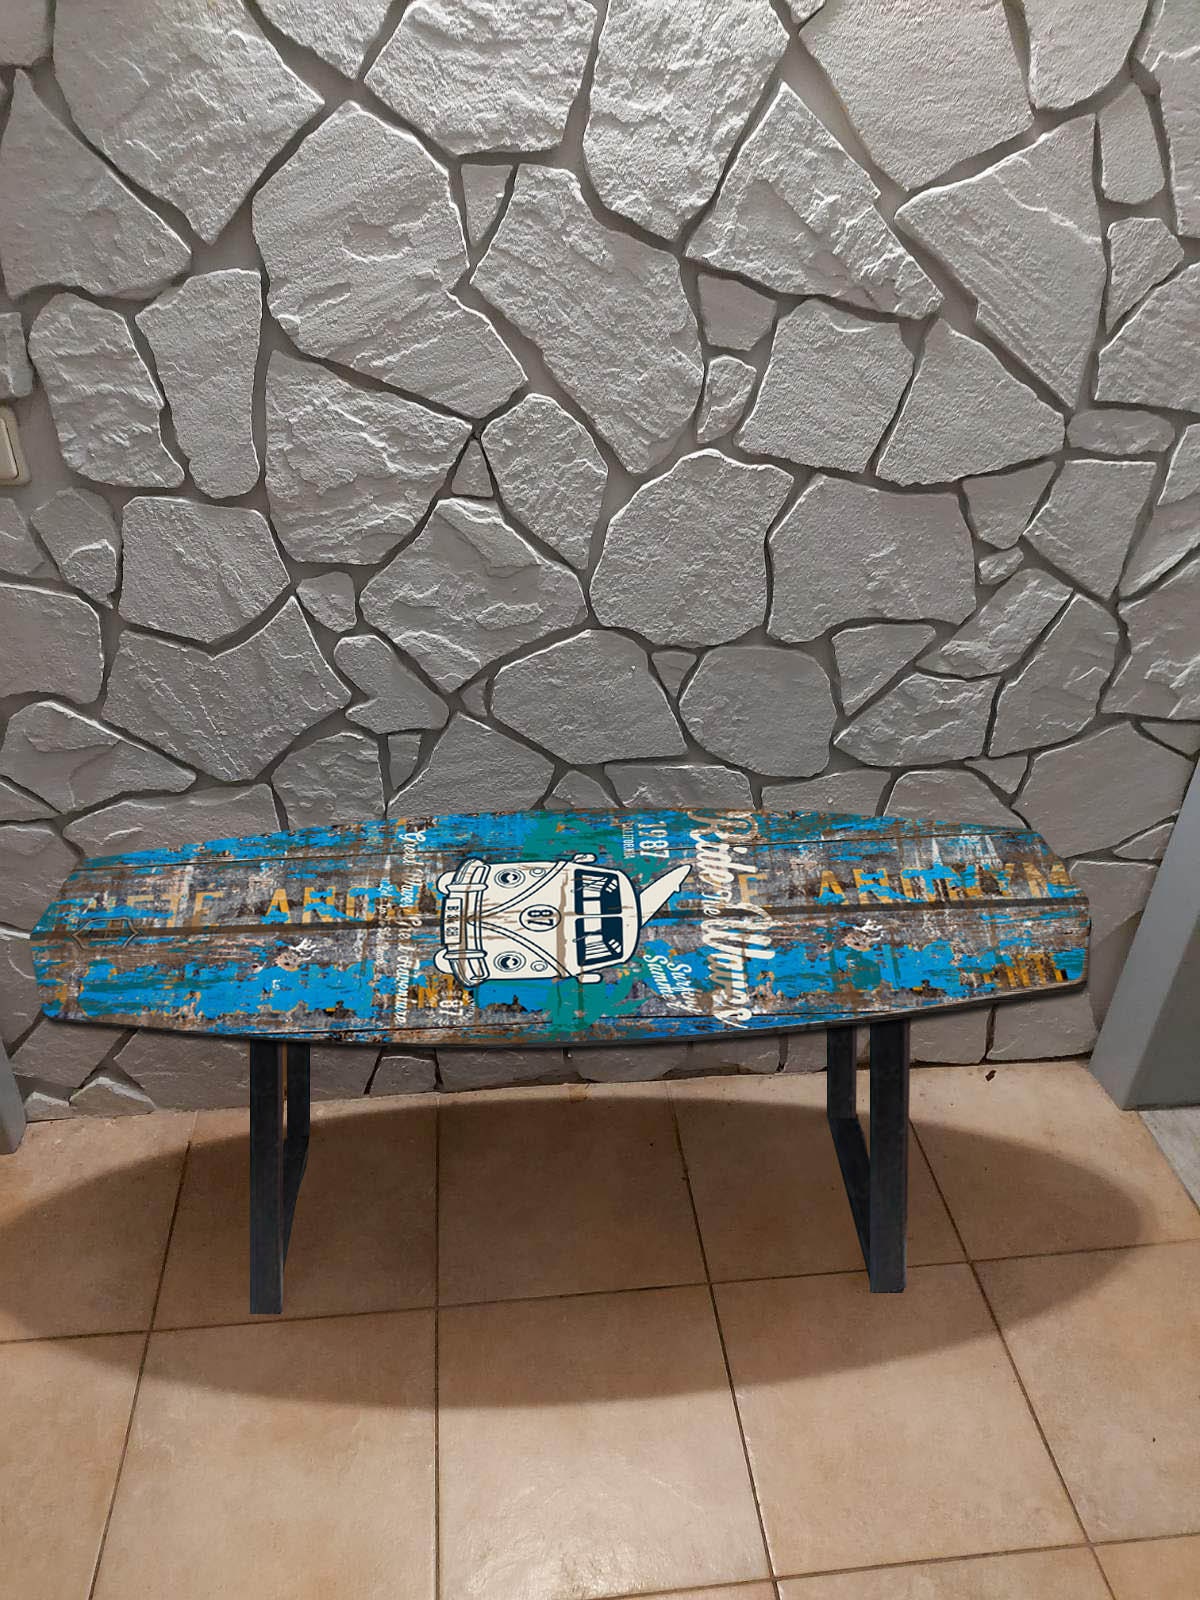 Surfboard Antique Style Wooden Bench in White and Blue Colors: Surf Club “Surfing Camp”